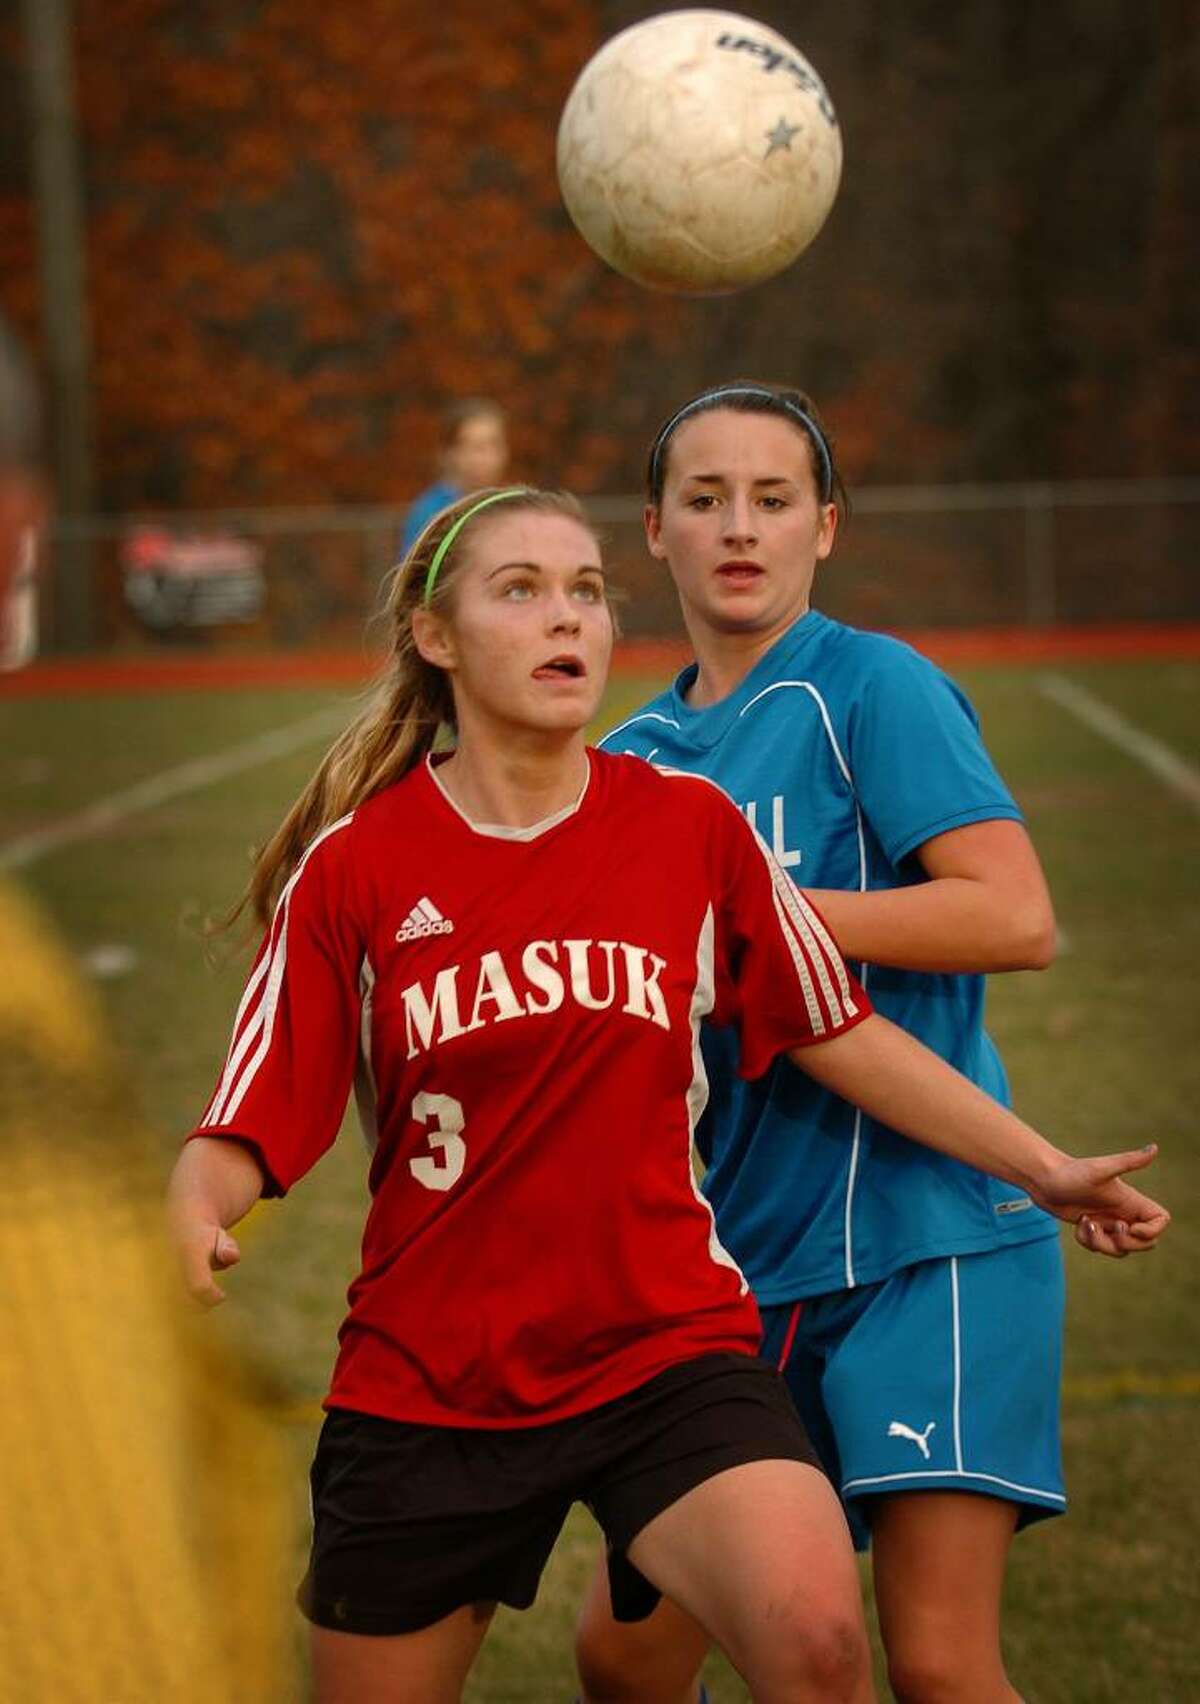 Masuk's Collen Coubren eyes the ball in front of Bunnell defender Megan Murphy during Monday's matchup in the opening round of the Class L state playoffs at Masuk High School in Monroe.